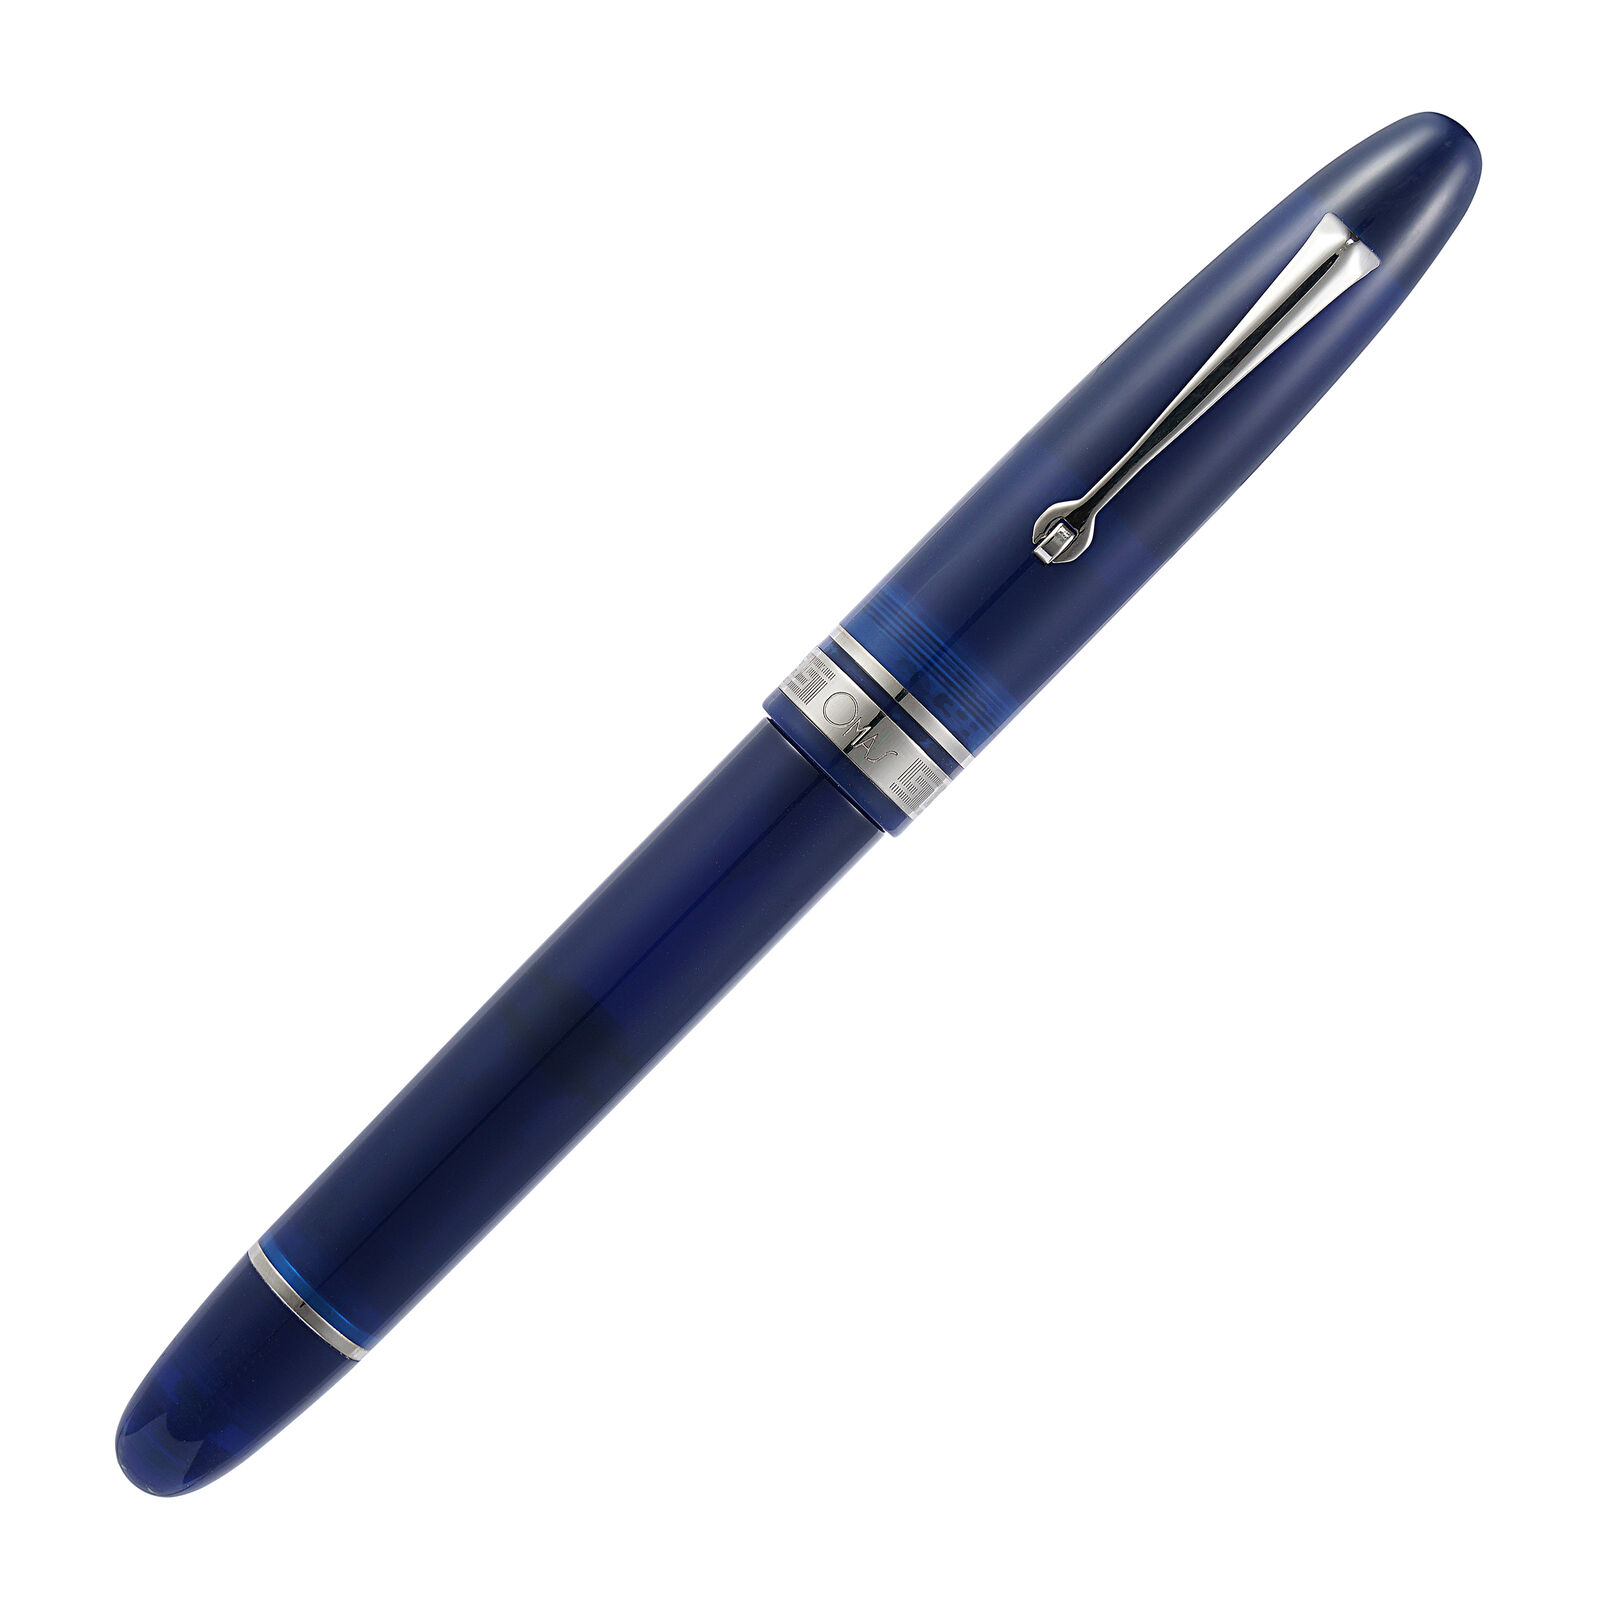 Omas Ogiva Fountain Pen in Blu with Silver Trim - Broad Point - NEW in Box